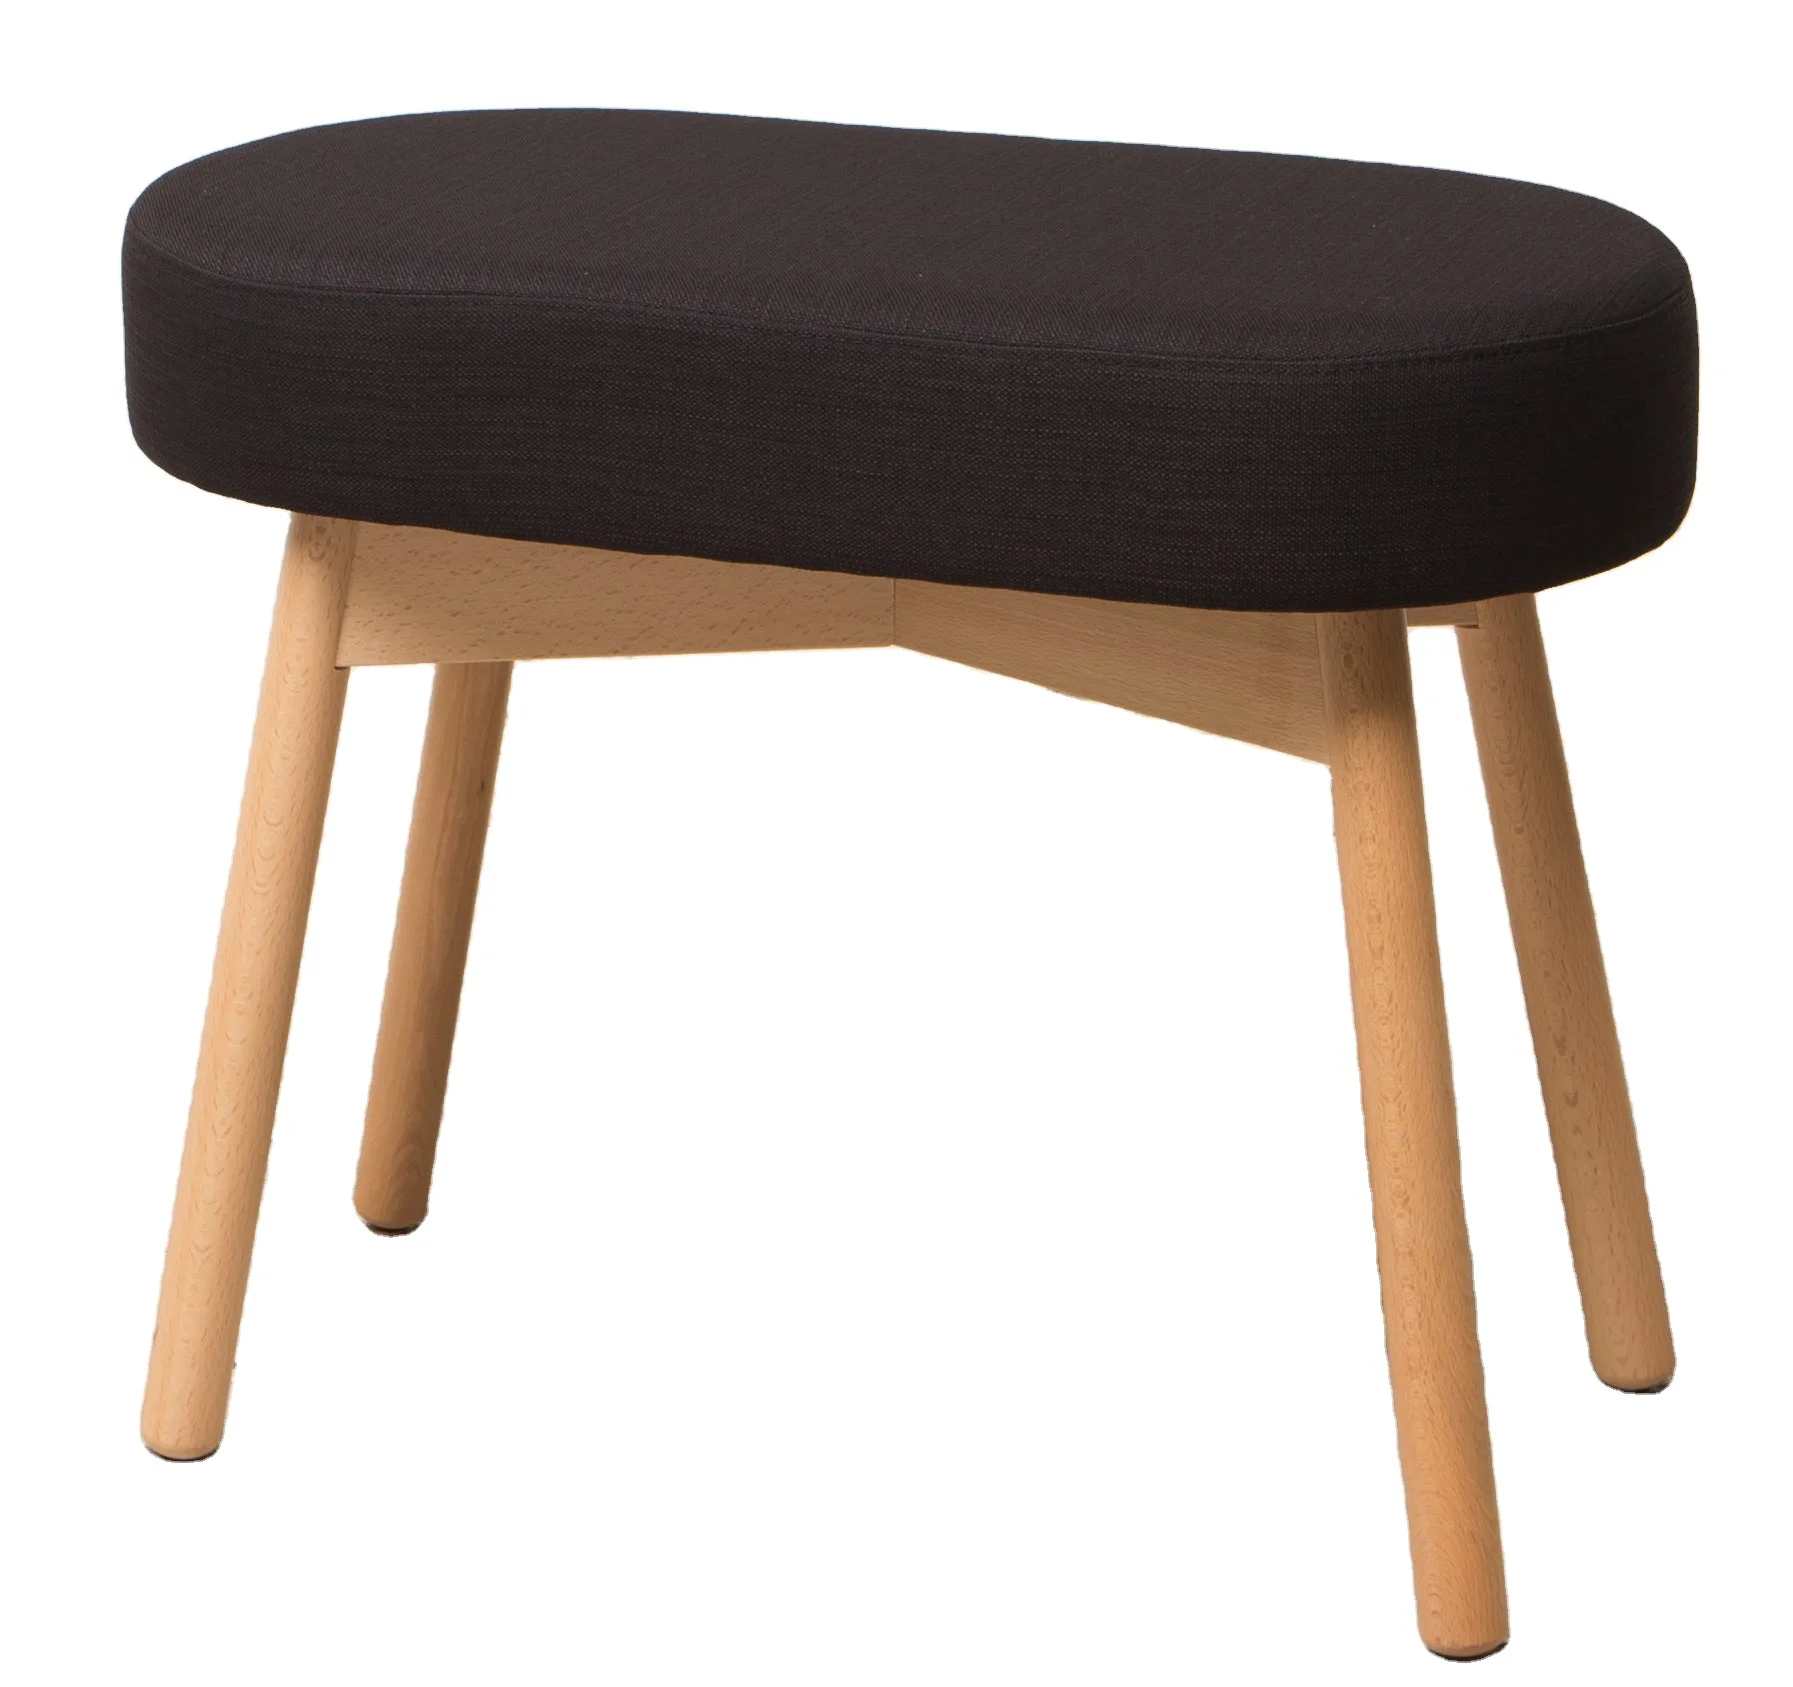 UPHOLSTERED TWIN COLORED TOKIO STOOL